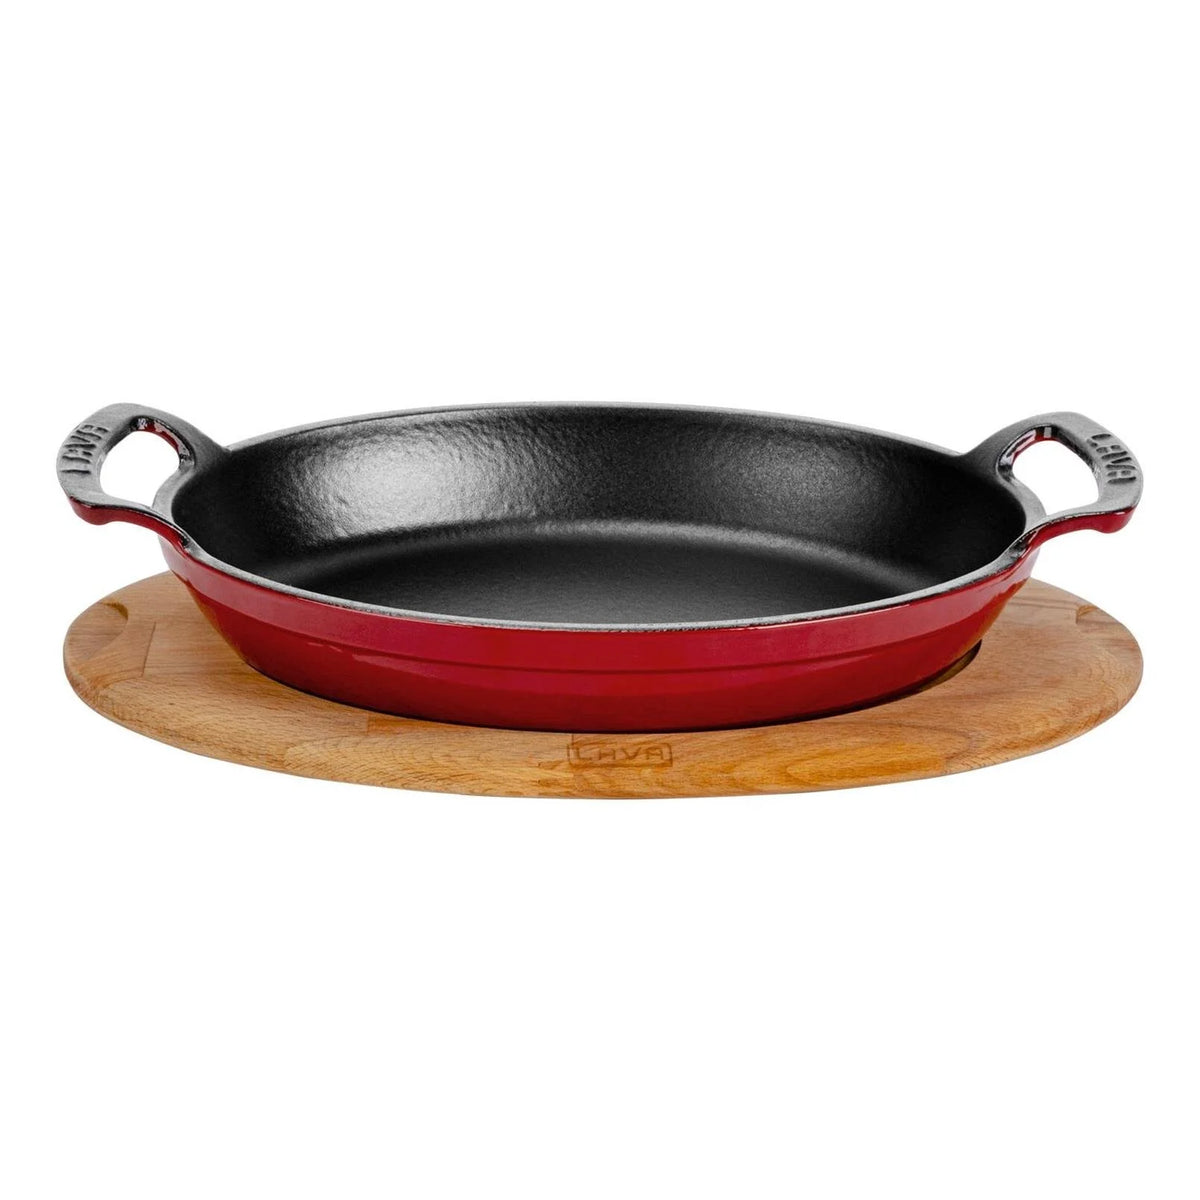 Lava Casting Oval Sahan Cast Iron Solid Double Handled Service Wood Red Size 27x20cm. LV O TV 2720 SHN AH 219 BE